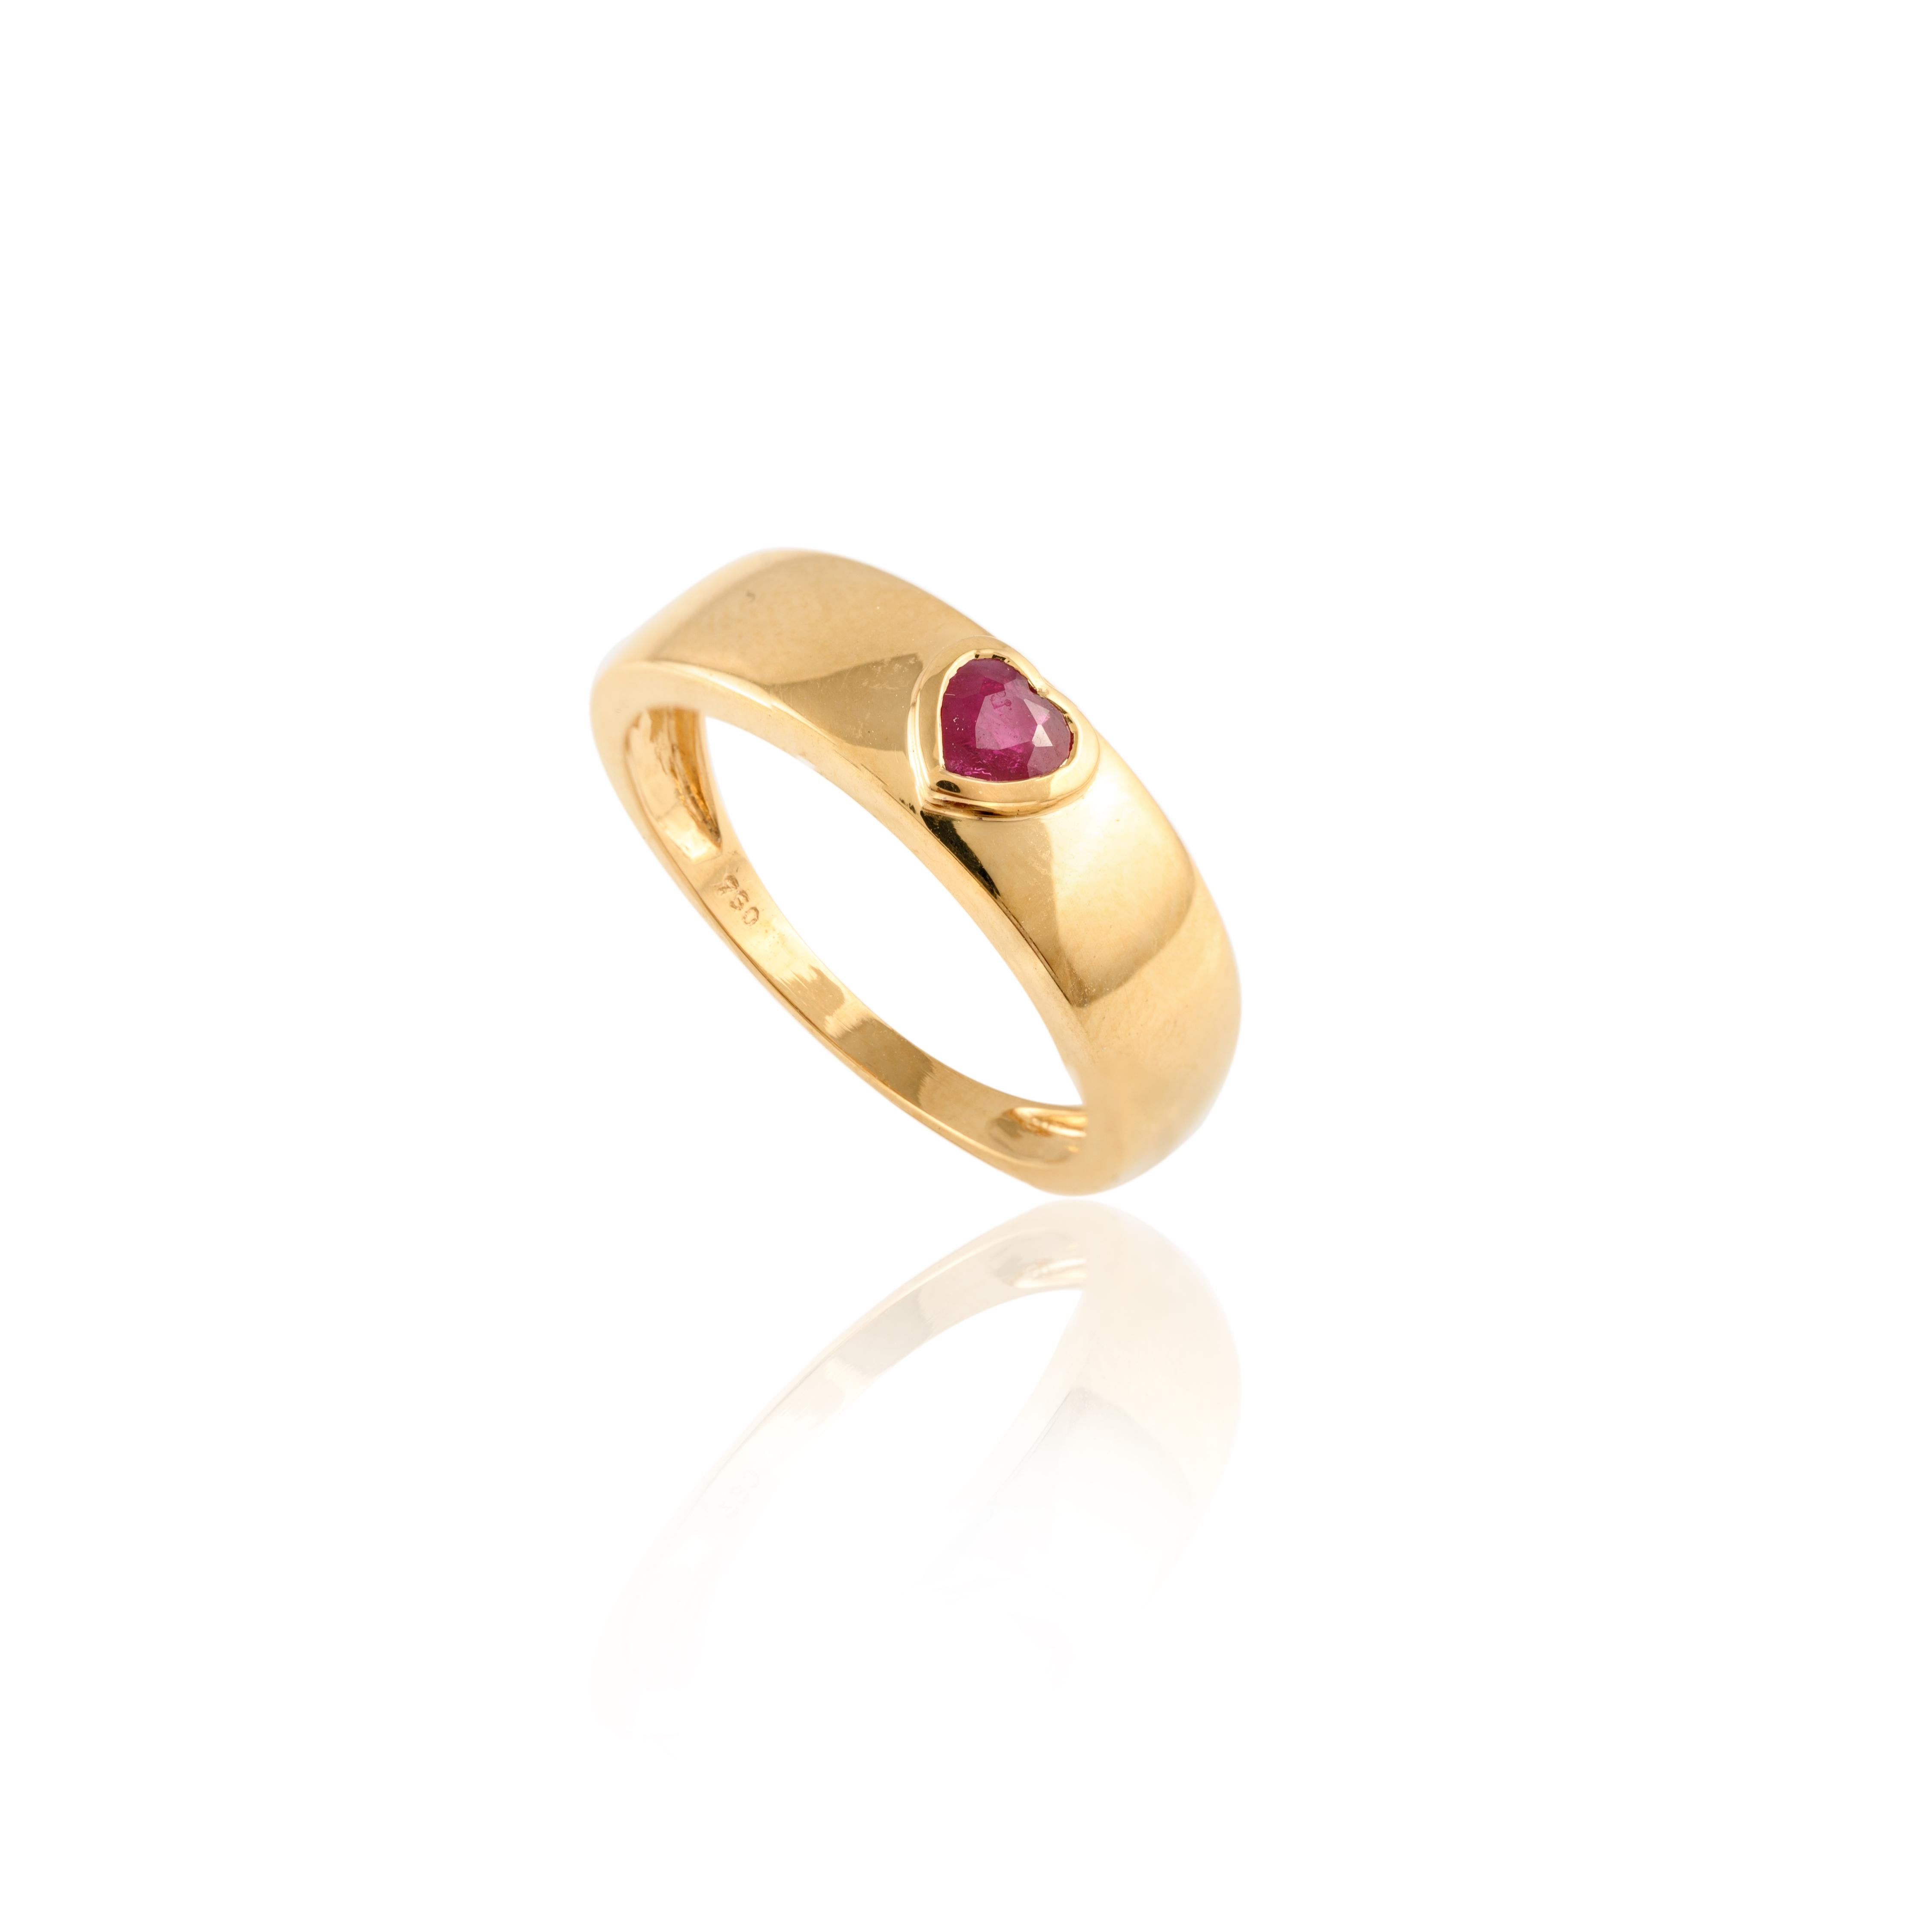 For Sale:  Dainty Heart Cut Ruby Pinky Ring 18k Solid Yellow Gold Signet Ring for Her 2